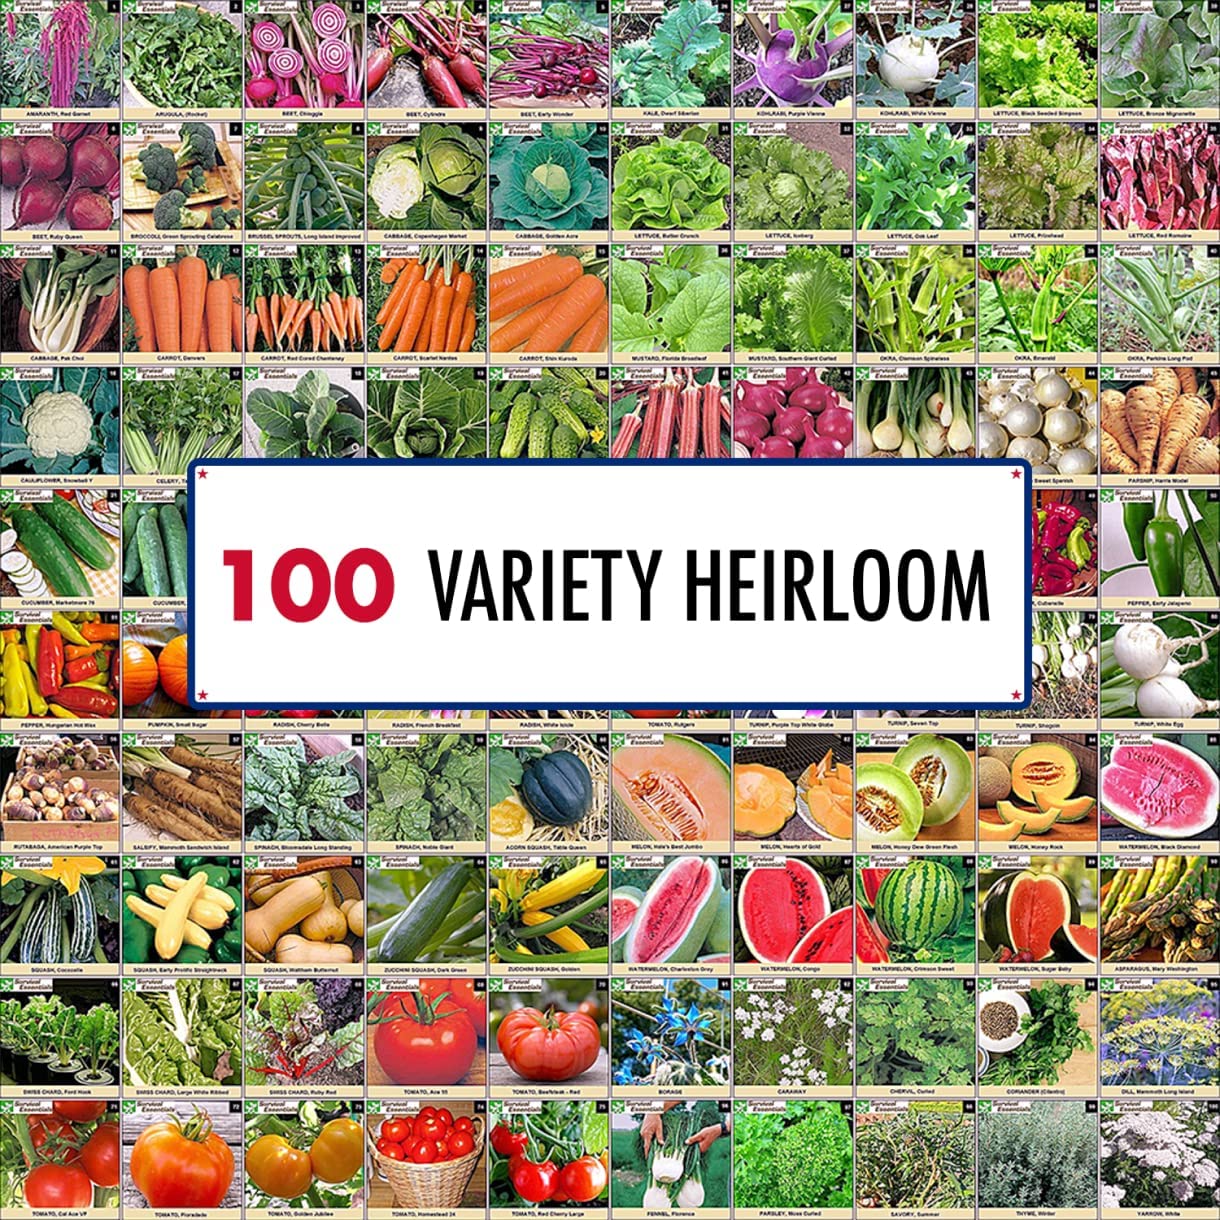 Image showcasing a diverse collection of 100 heirloom varieties